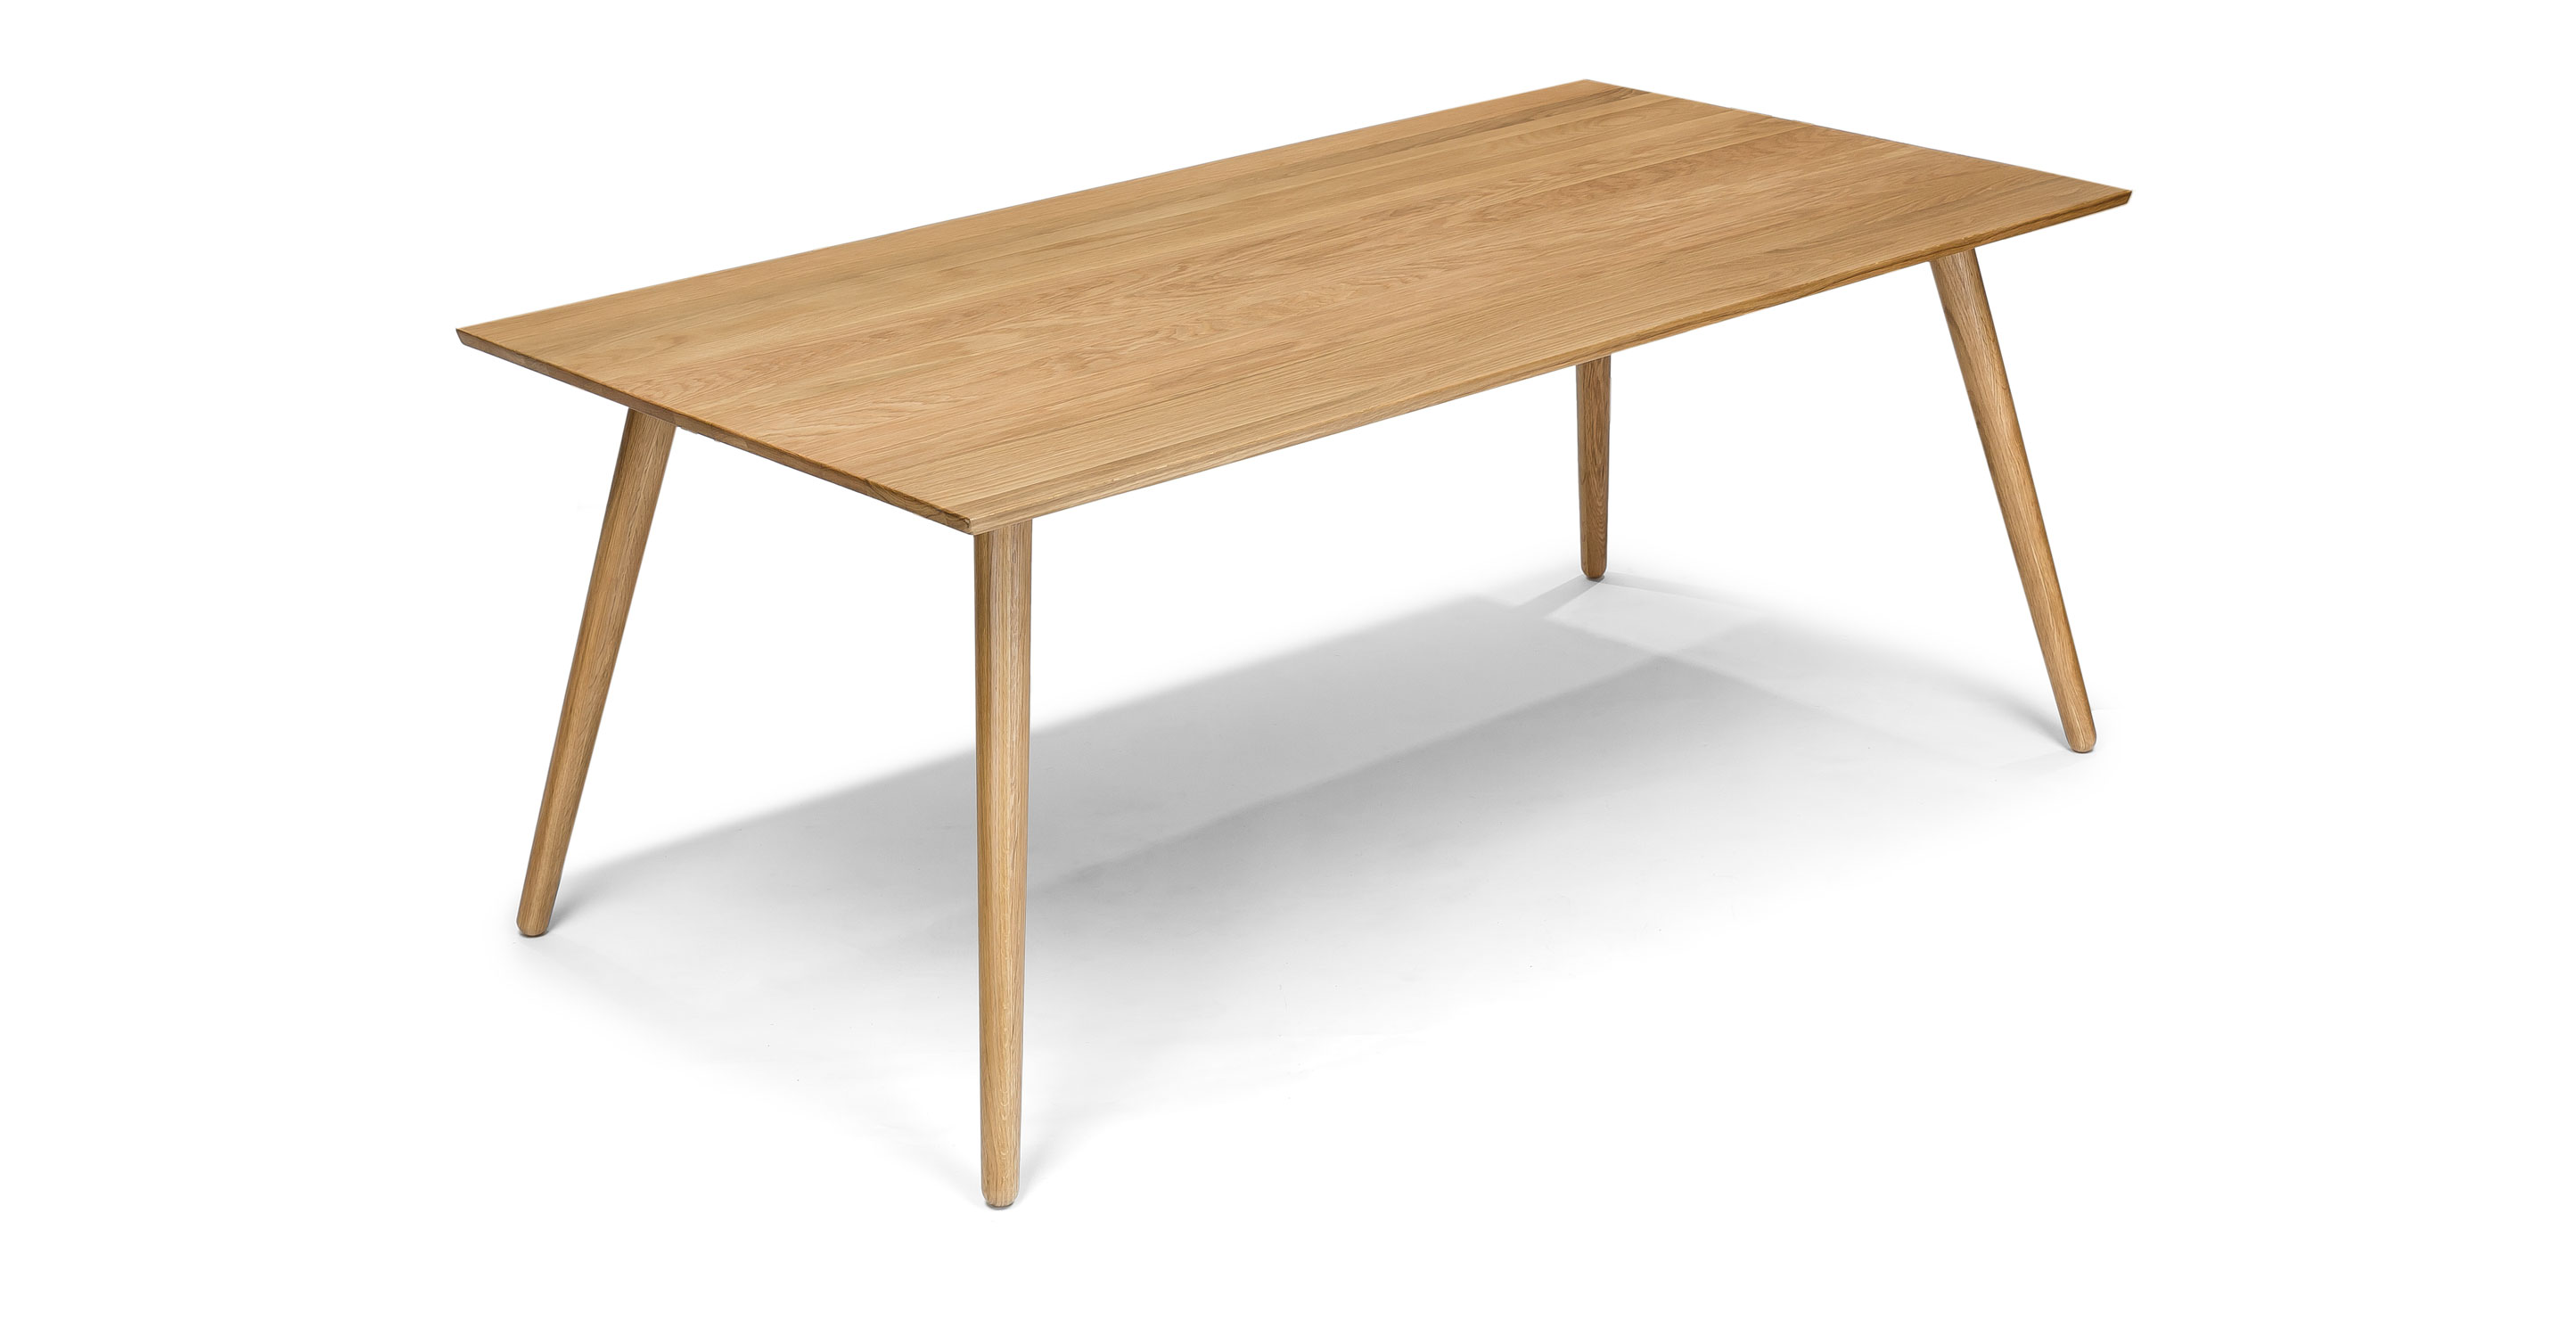 Rectangle Oak Wood Dining Table For 6, Contemporary Oak Dining Room Furniture